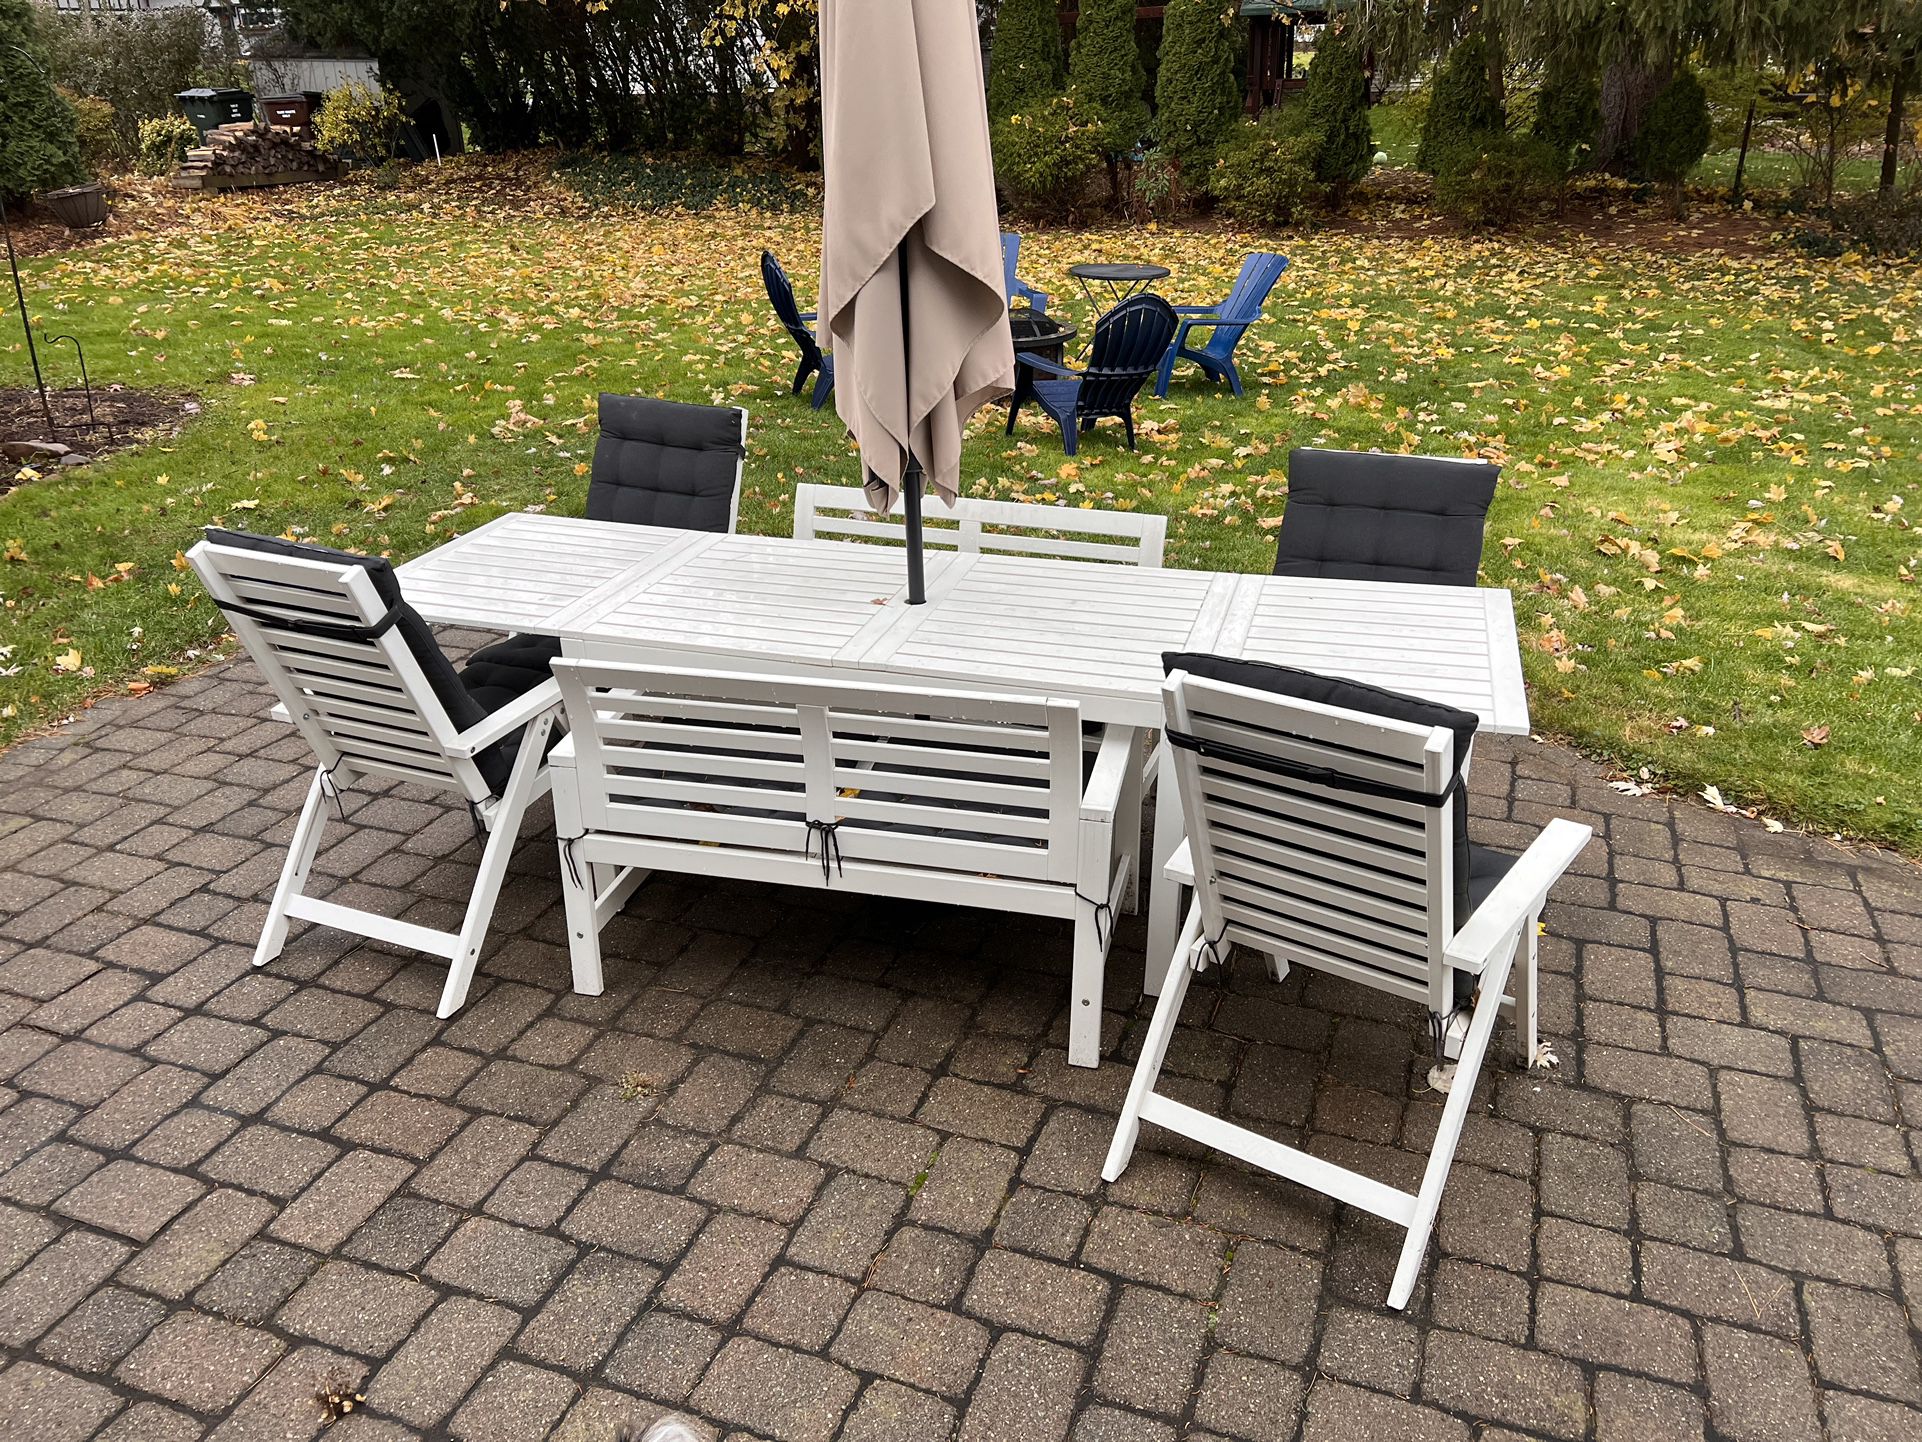 IKEA Patio Furniture - Bench Seats And Recliners